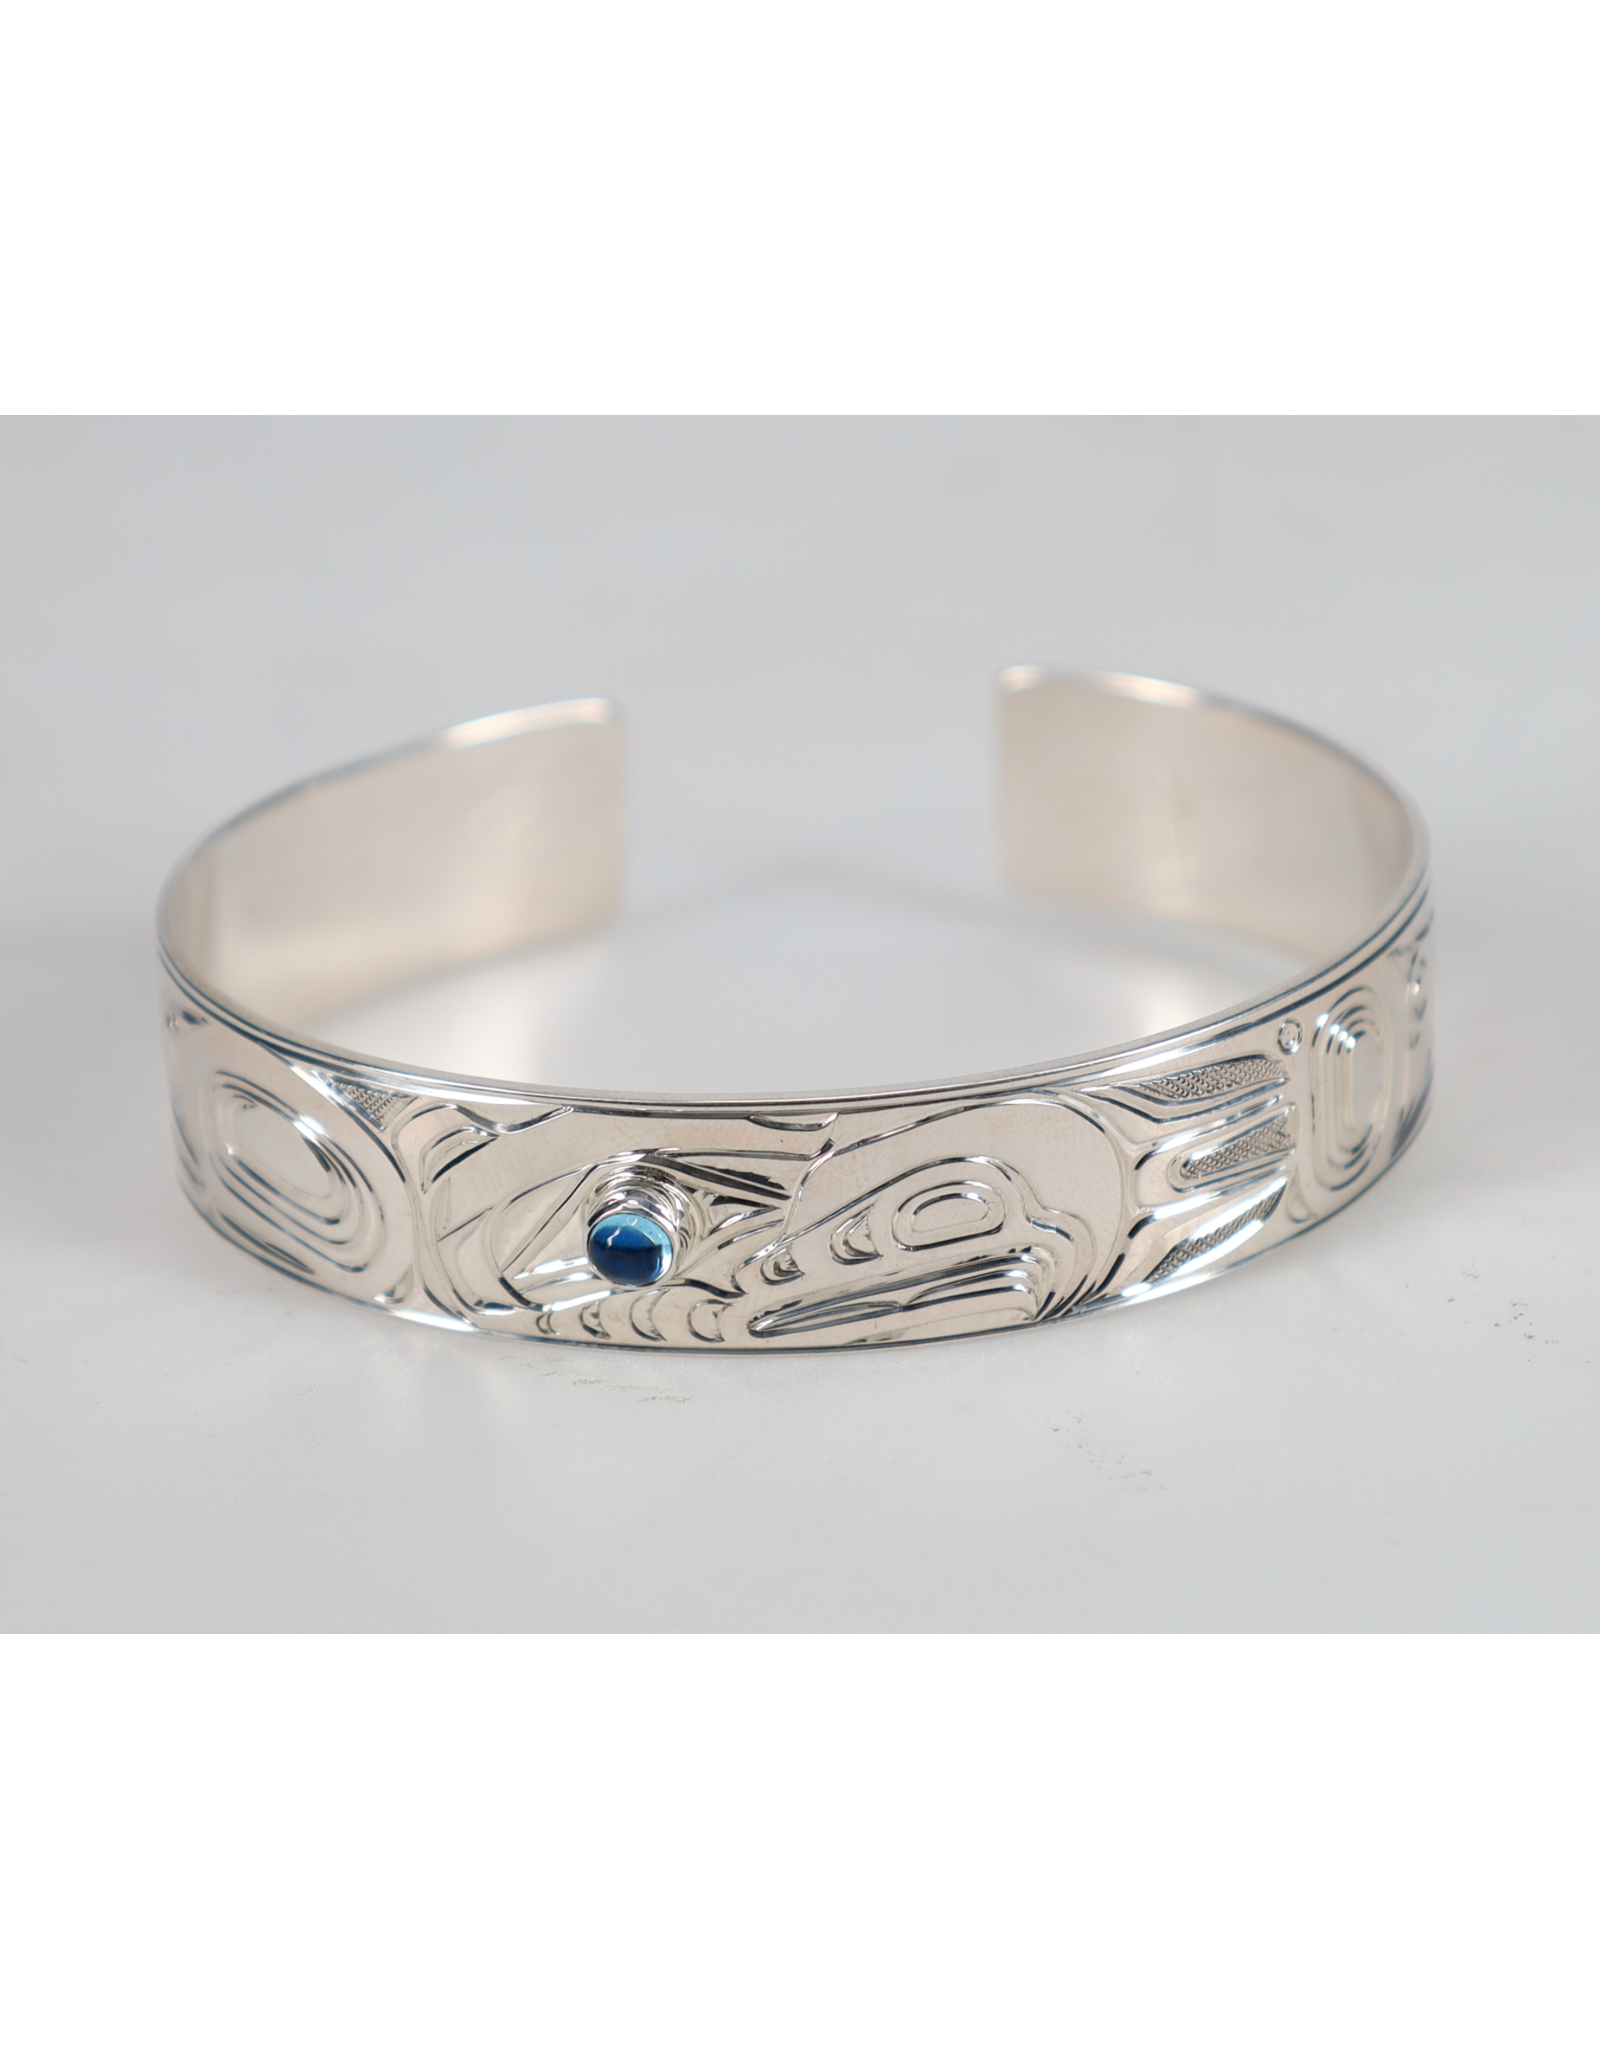 Chris Cook Silver Cuff - Eagle with Blue Topaz - CCSC08